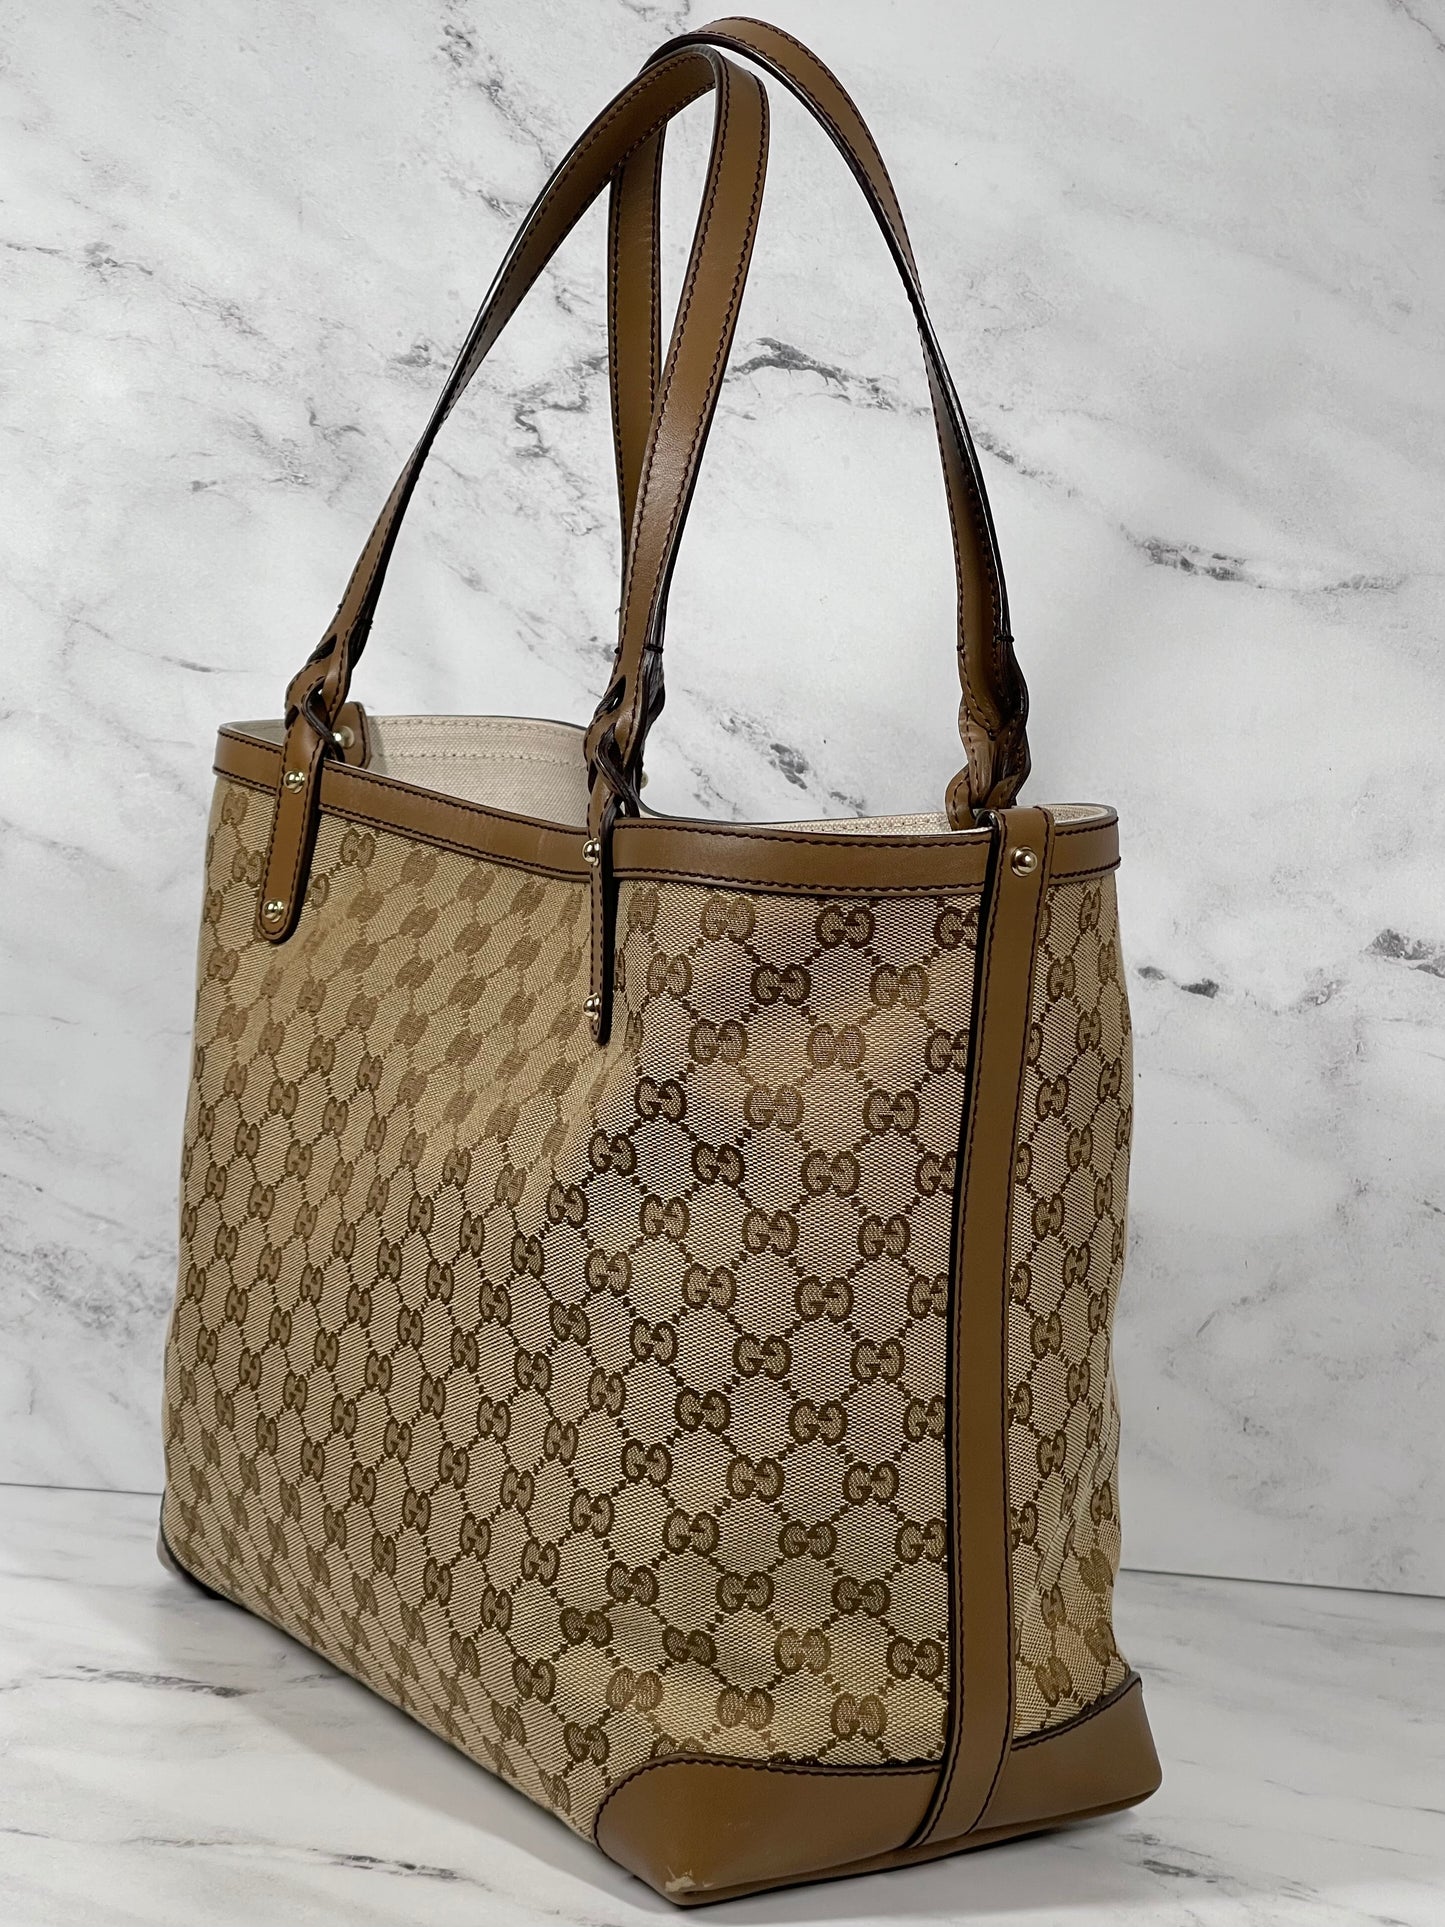 Gucci Brown GG Monogram Canvas & Leather Shoulder Tote Bag w Pouch